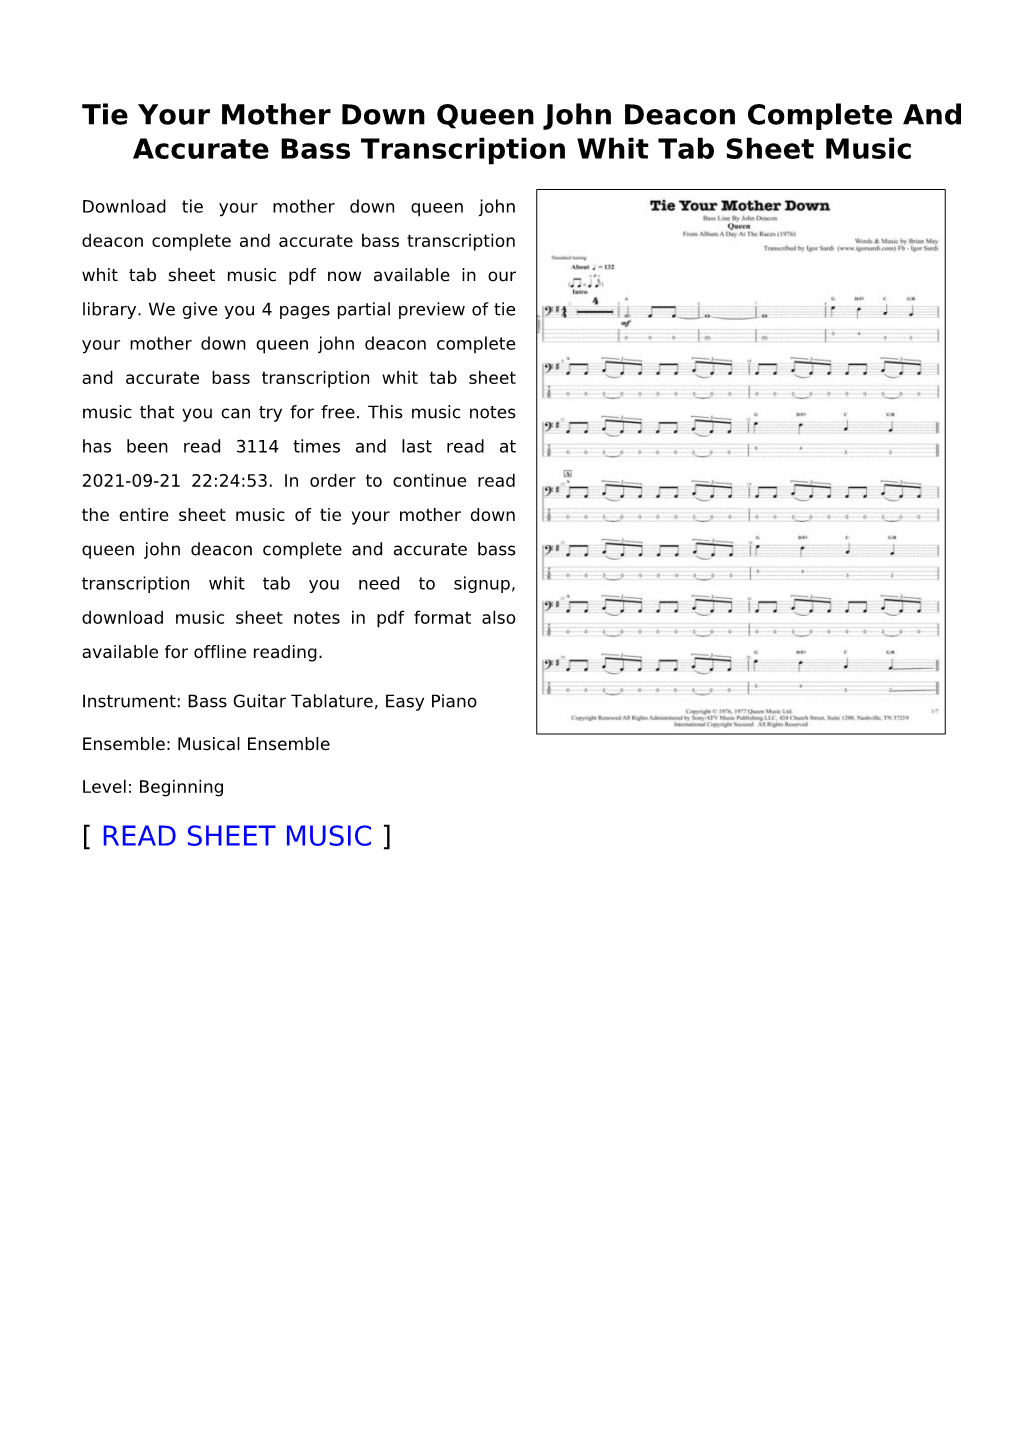 Tie Your Mother Down Queen John Deacon Complete and Accurate Bass Transcription Whit Tab Sheet Music